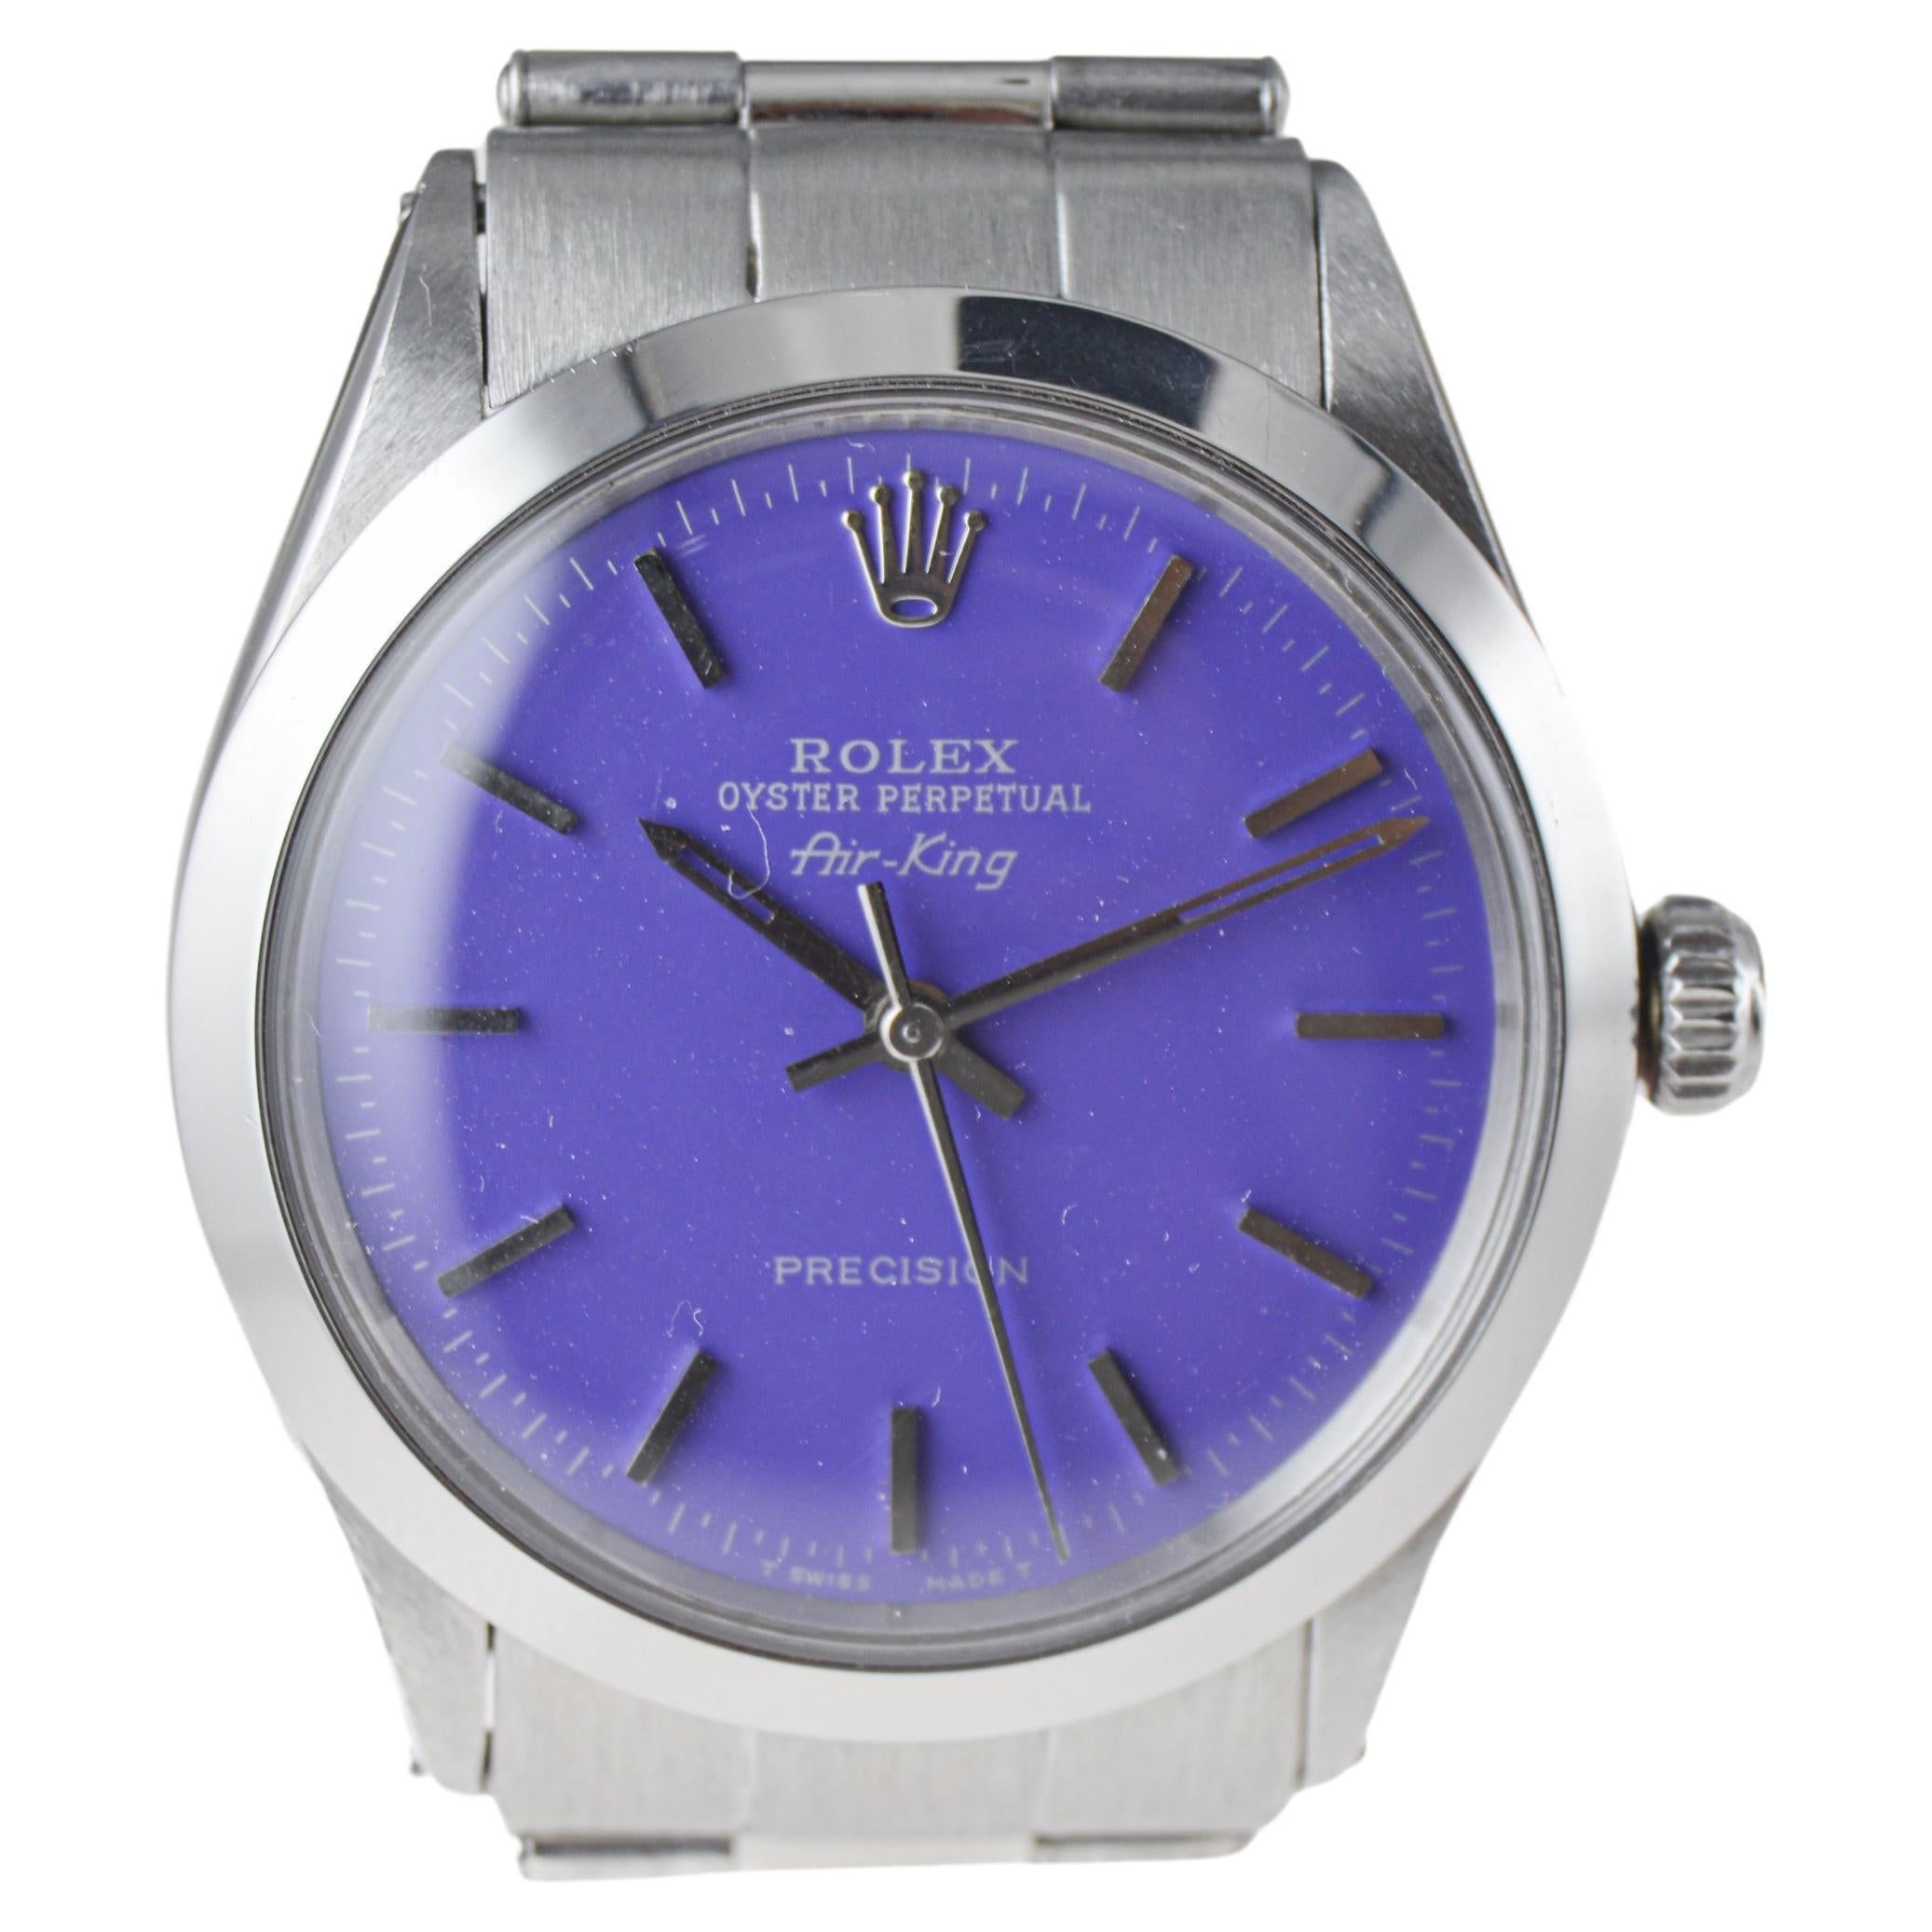 Rolex Stainless Steel Air King With Custom Purple Dial circa, 1960's For Sale 1